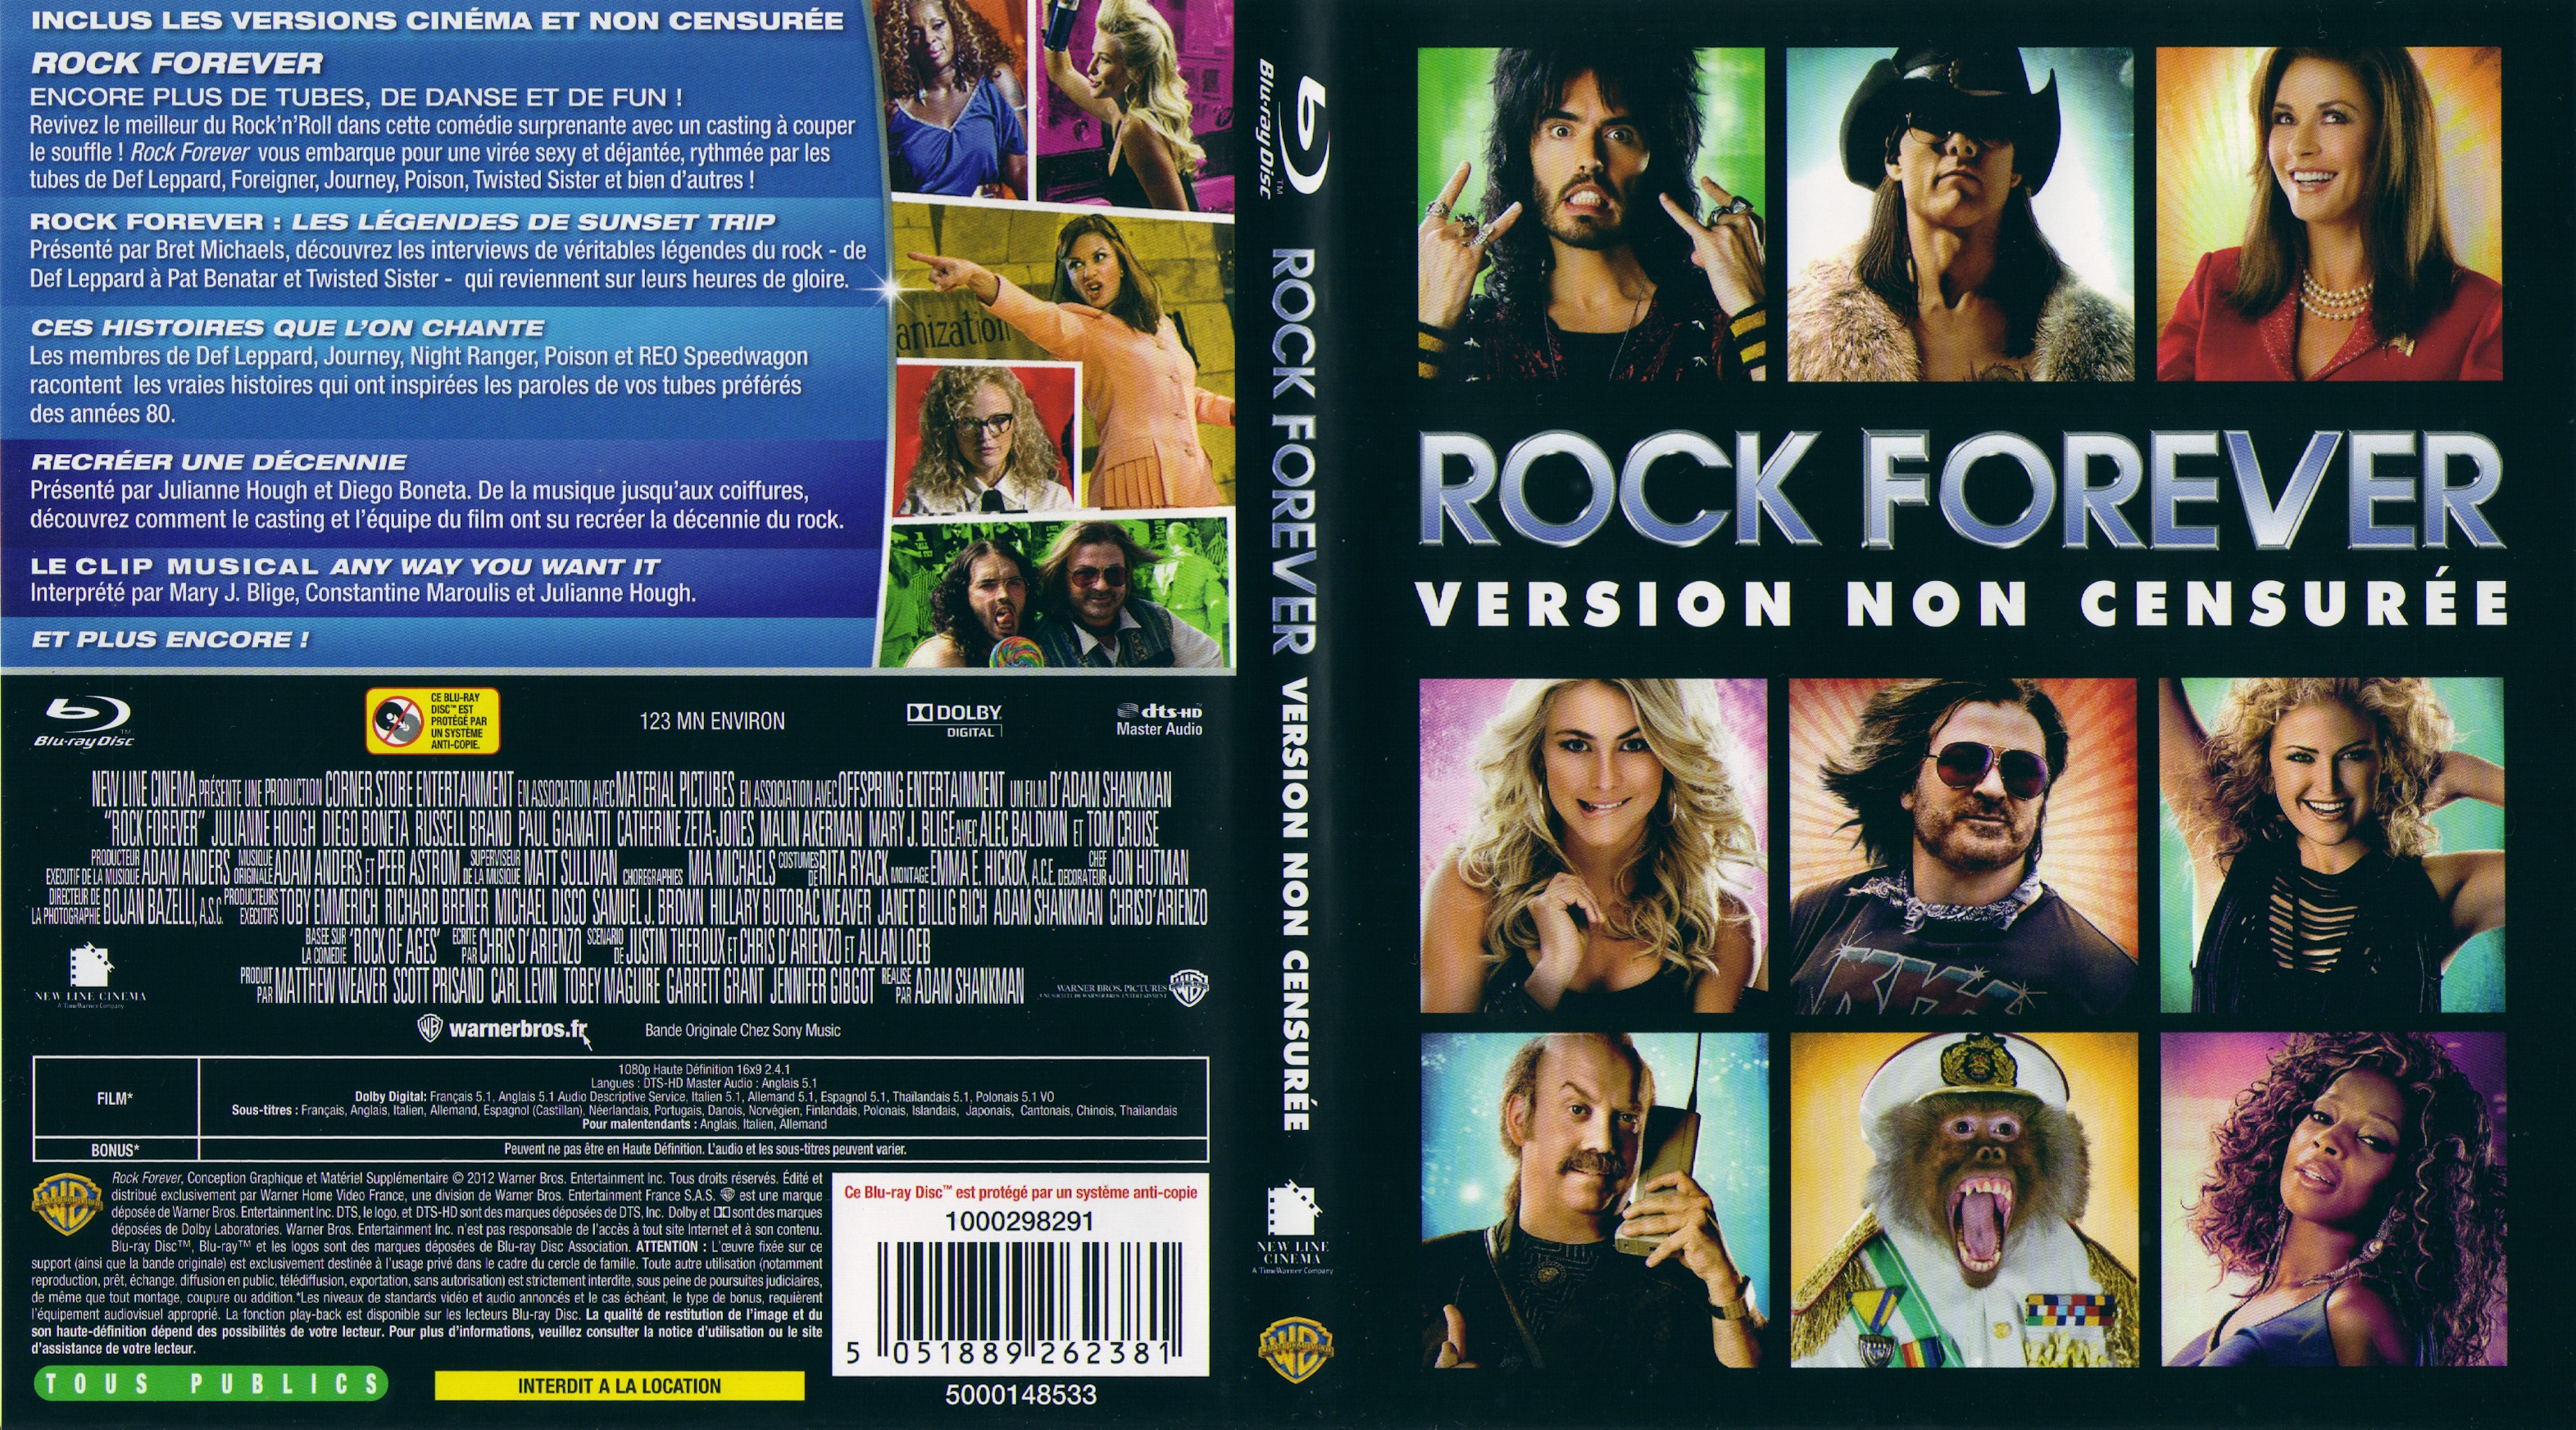 Jaquette DVD Rock Forever (BLU-RAY)